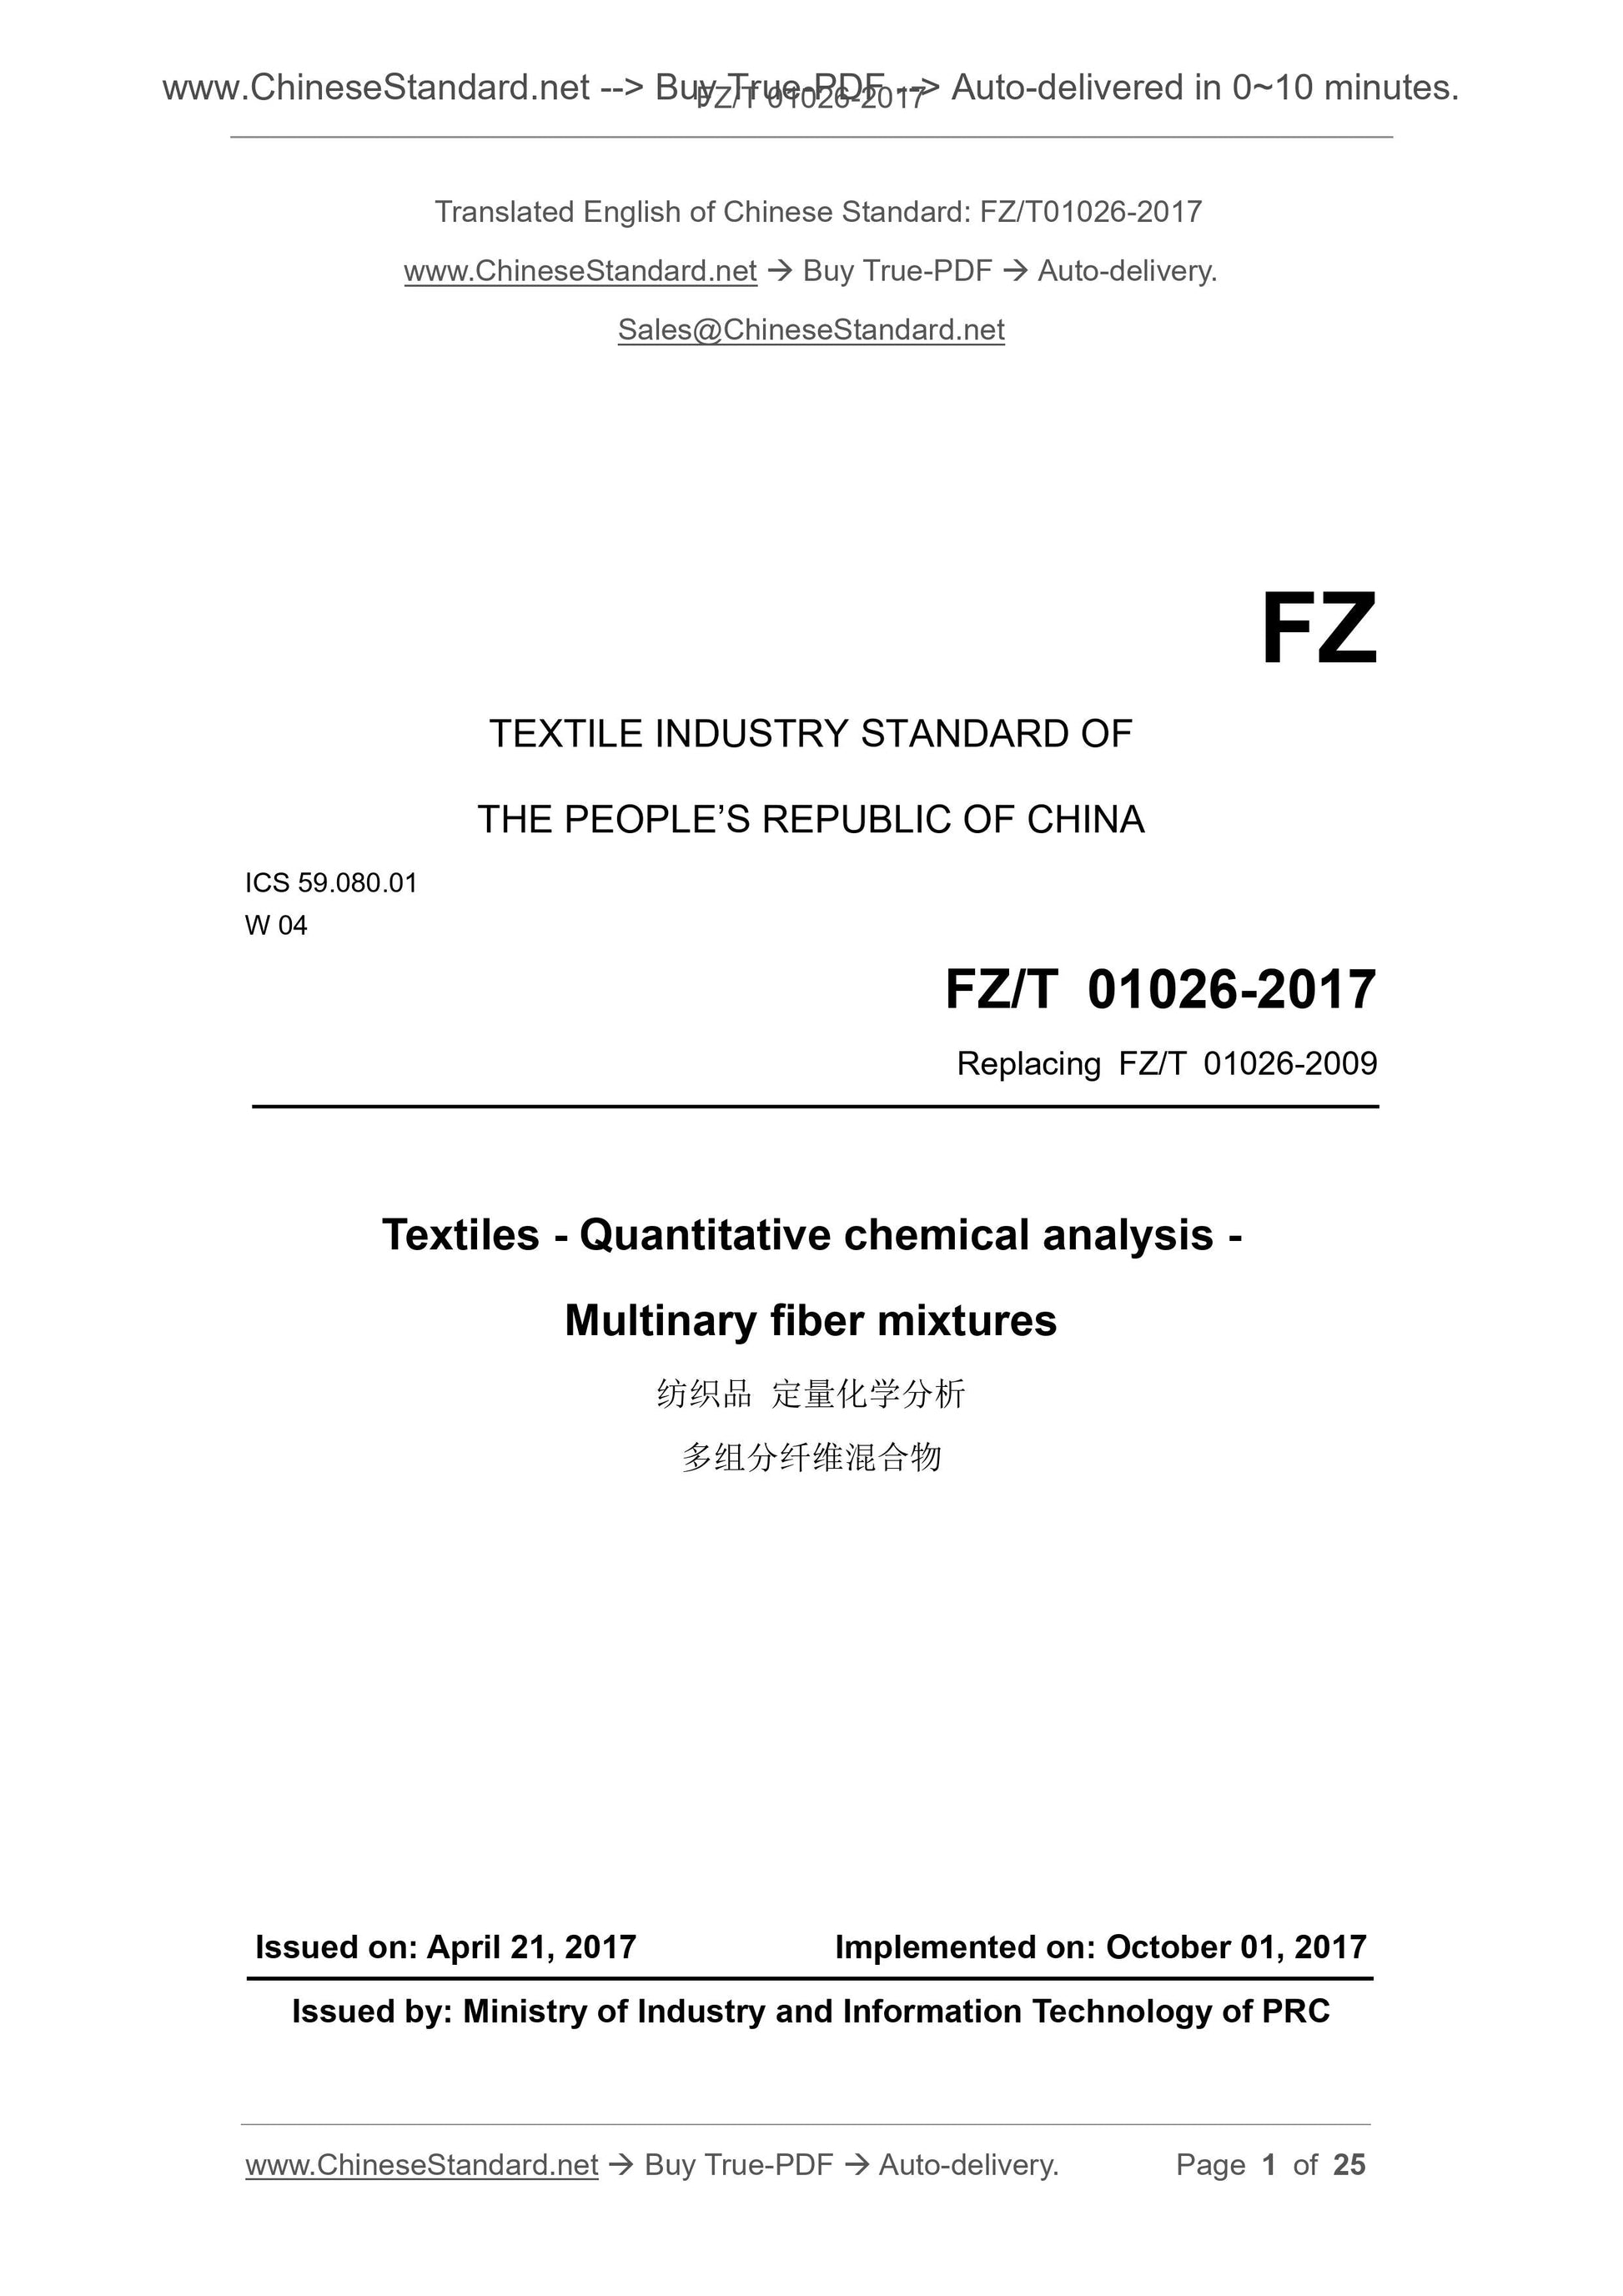 FZ/T 01026-2017 Page 1